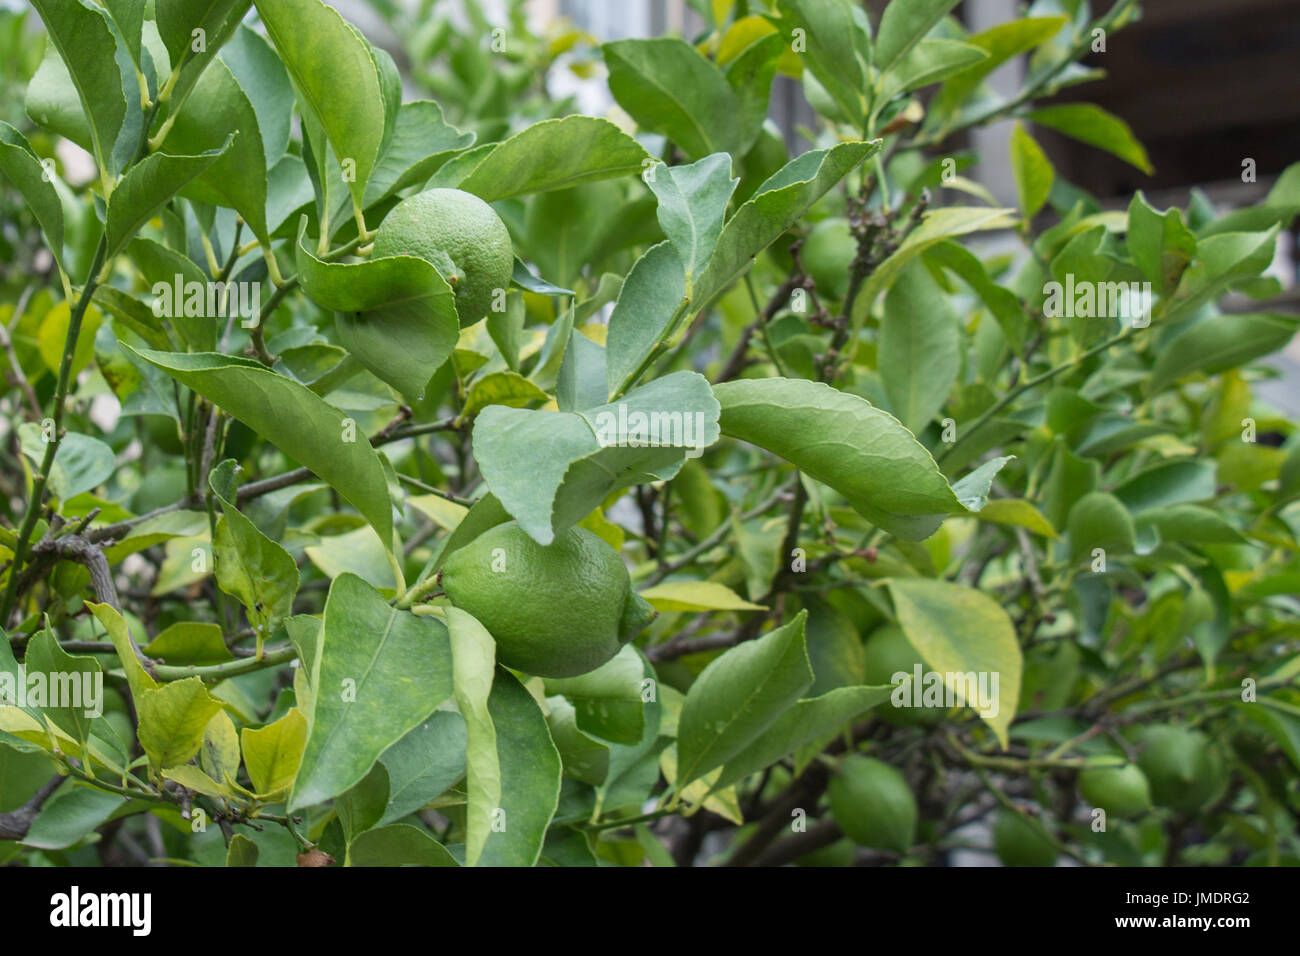 The close up view of a green lemon tree with lemon fruits. Stock Photo